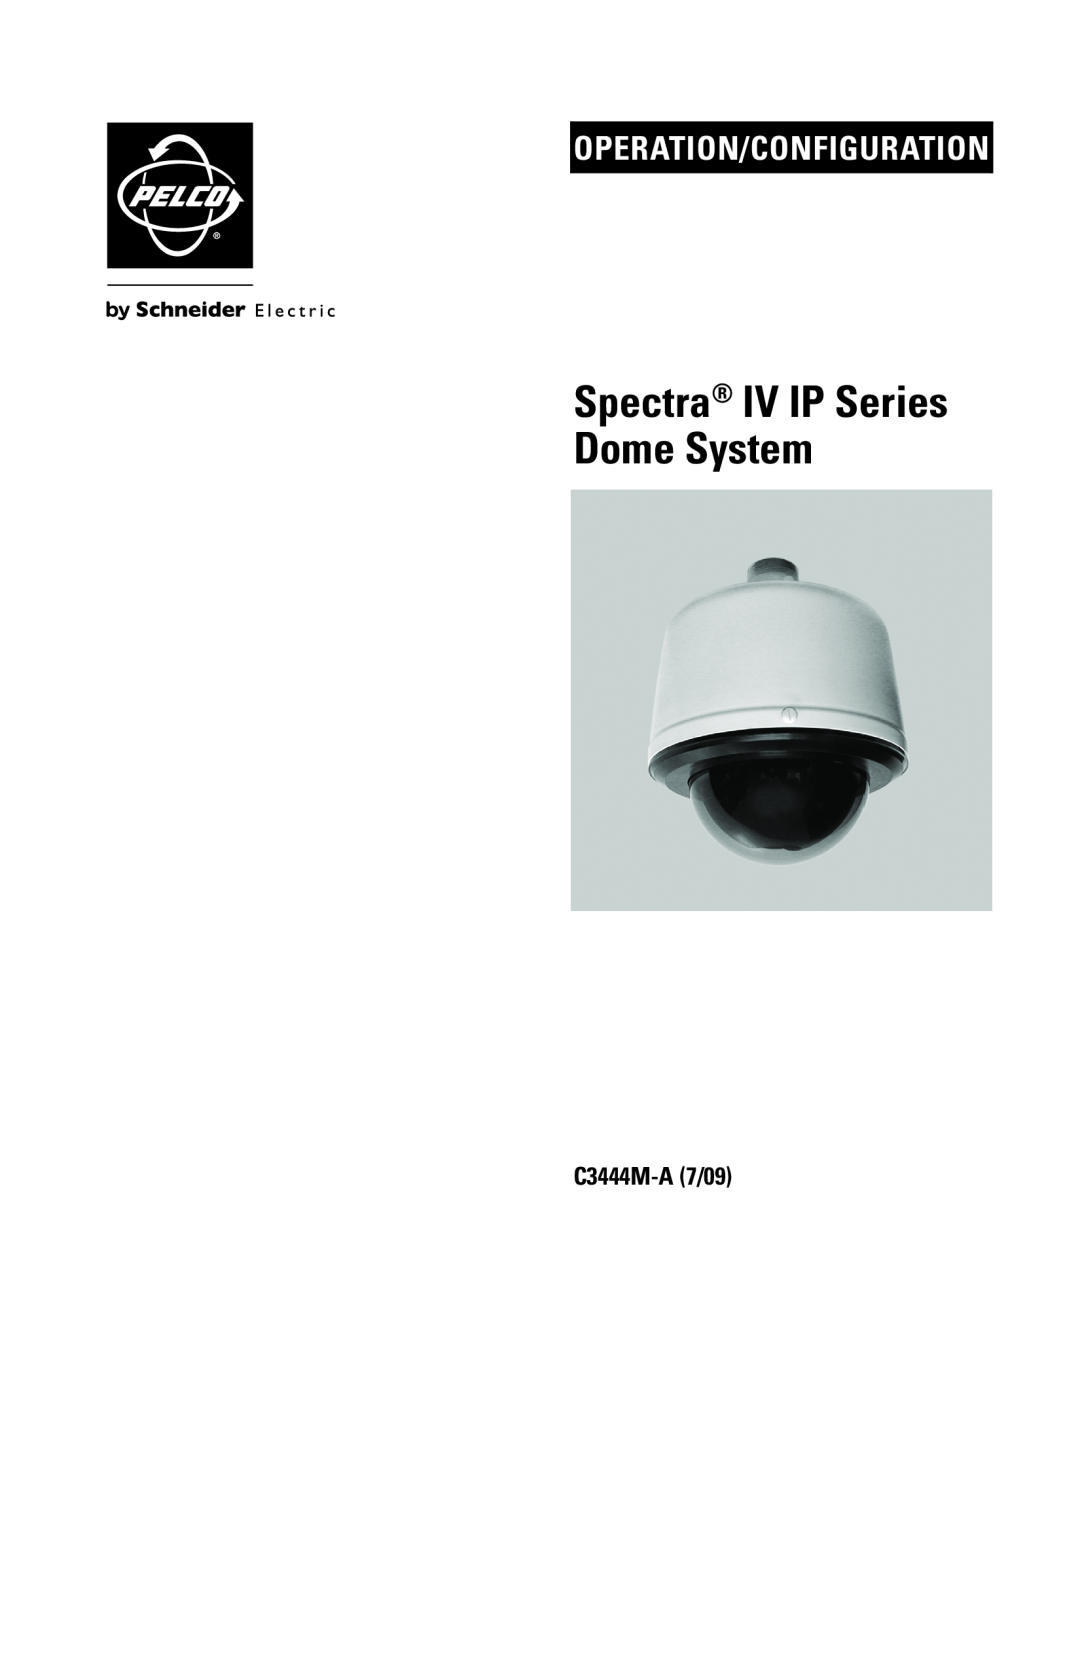 Pelco manual C3444M-A7/09, Spectra IV IP Series Dome System, Operation/Configuration 